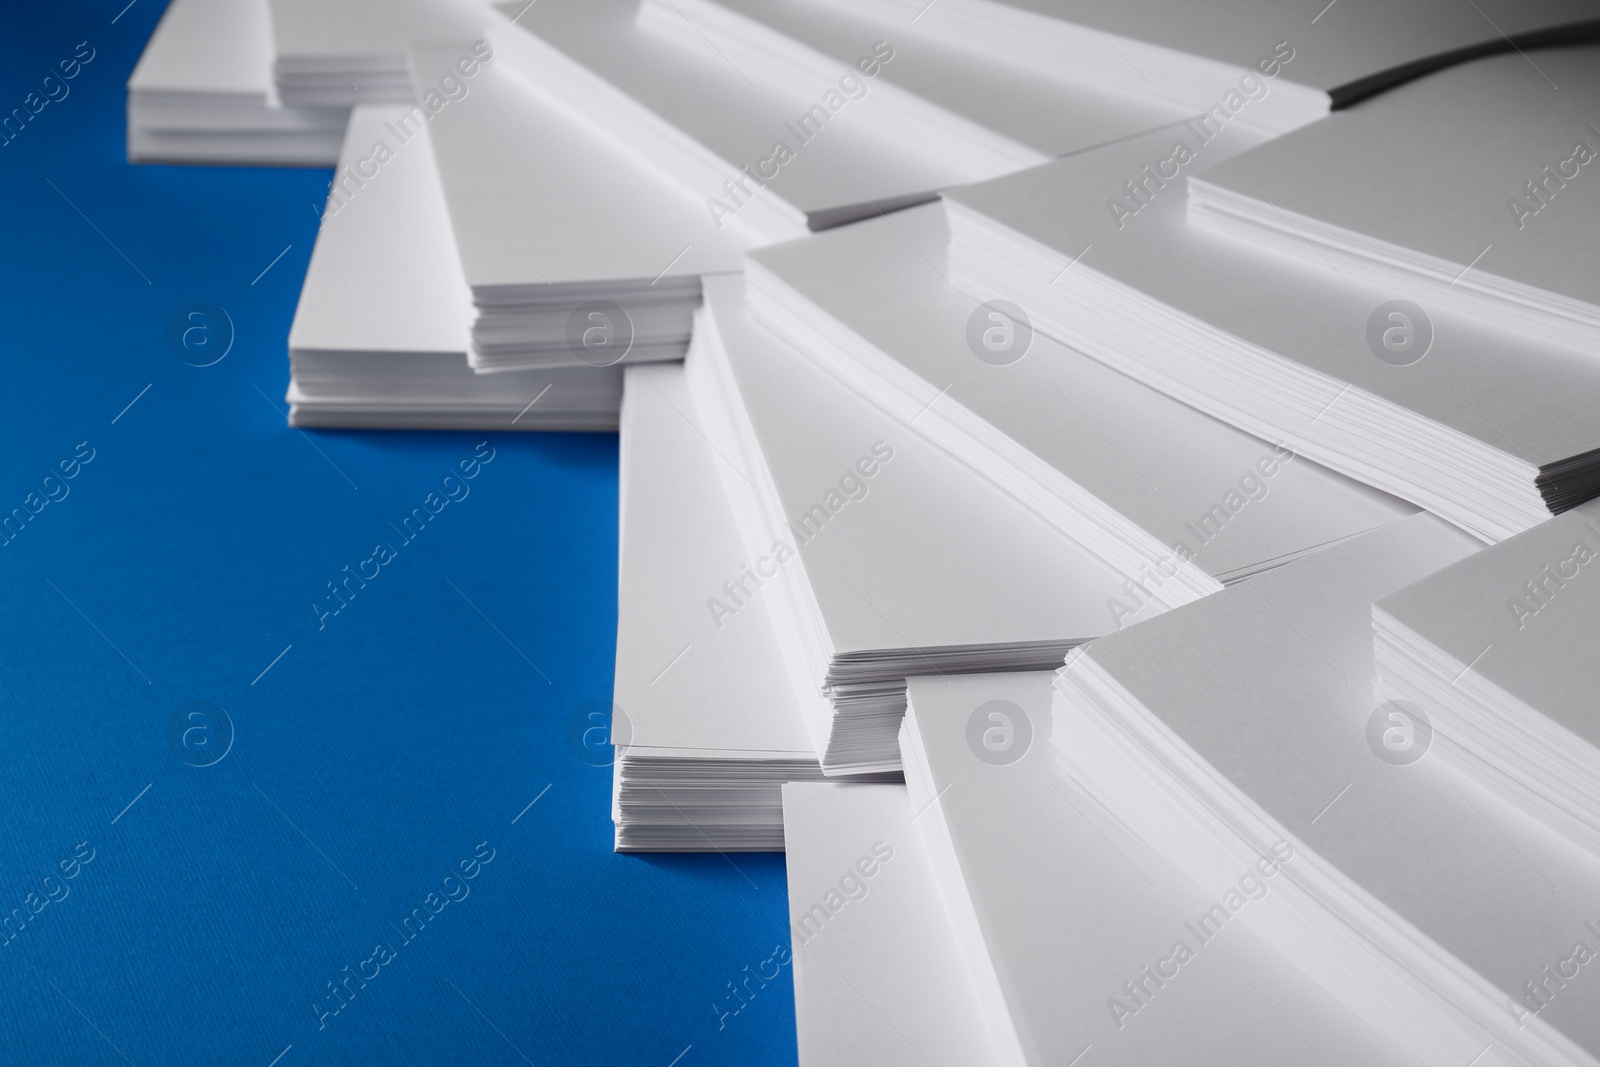 Photo of Many stacks of paper sheets on blue background, closeup